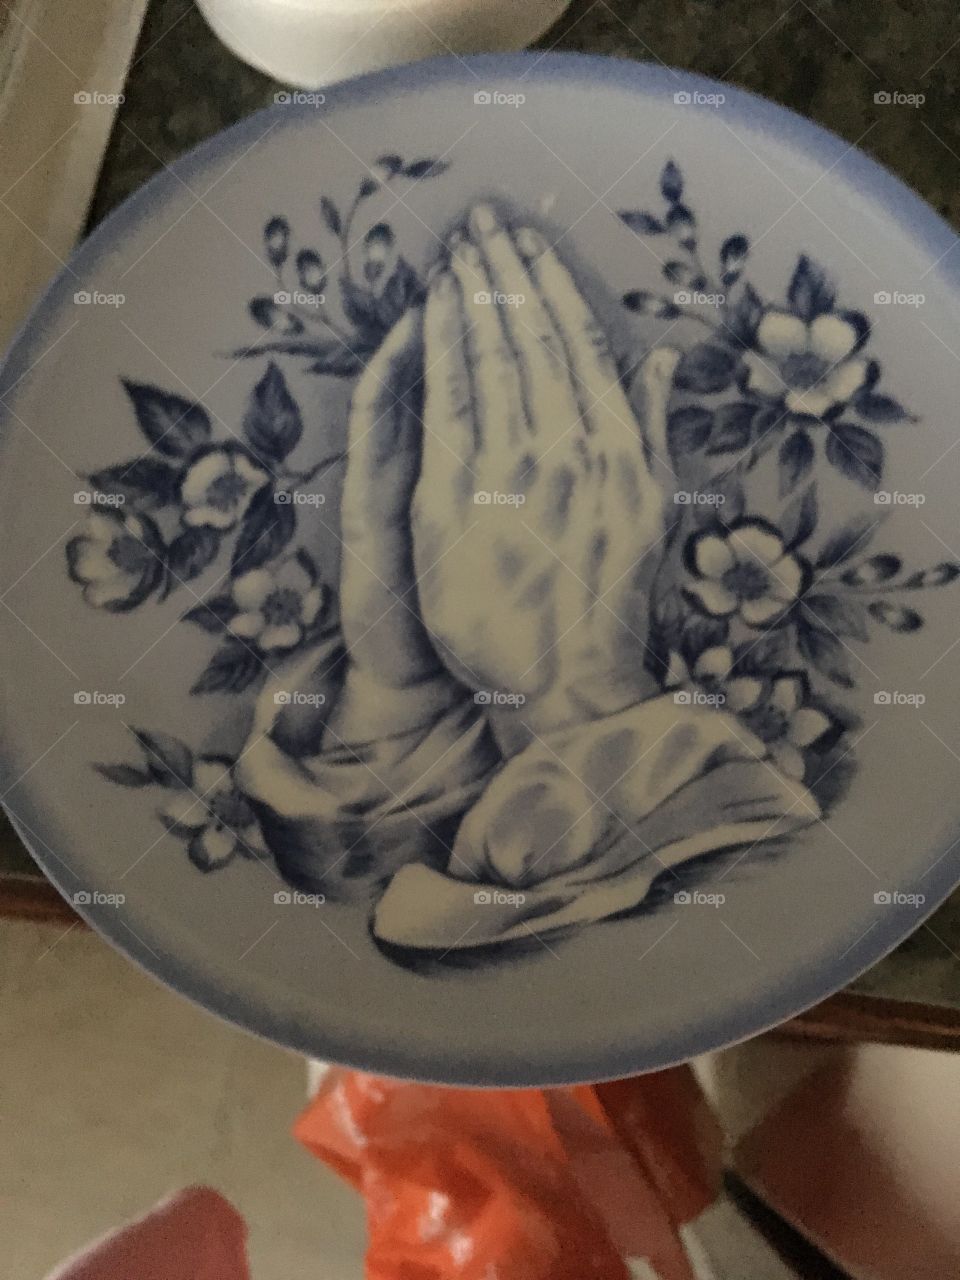 Found this the other day at a thrift store praying hands plate decorated in flowers 